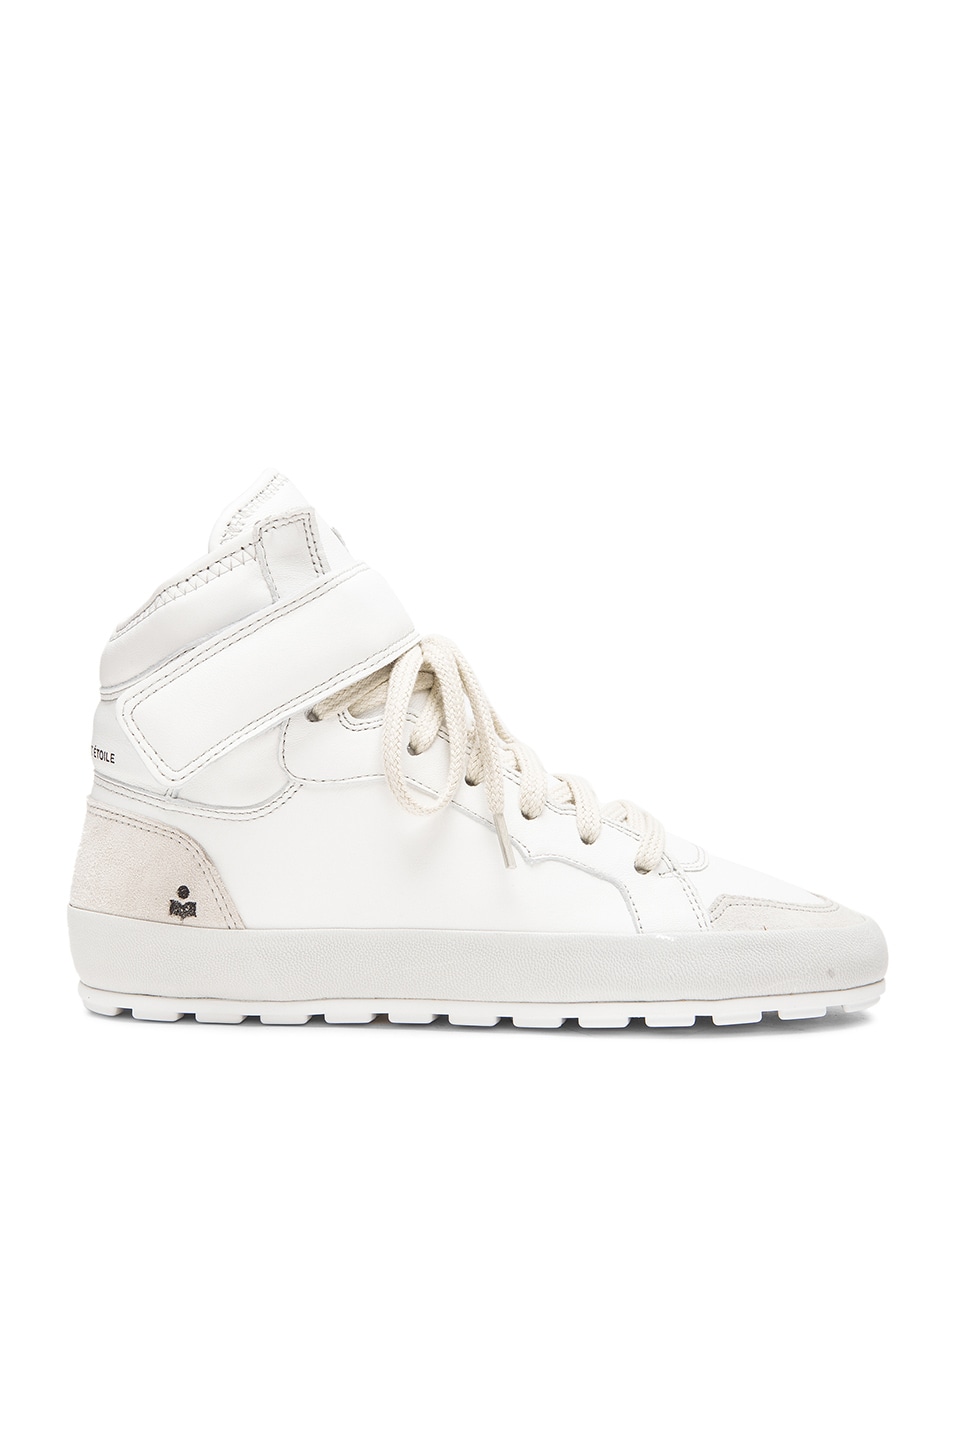 Isabel Marant Etoile Bessy Hip Hop Leather Sneakers in White | FWRD